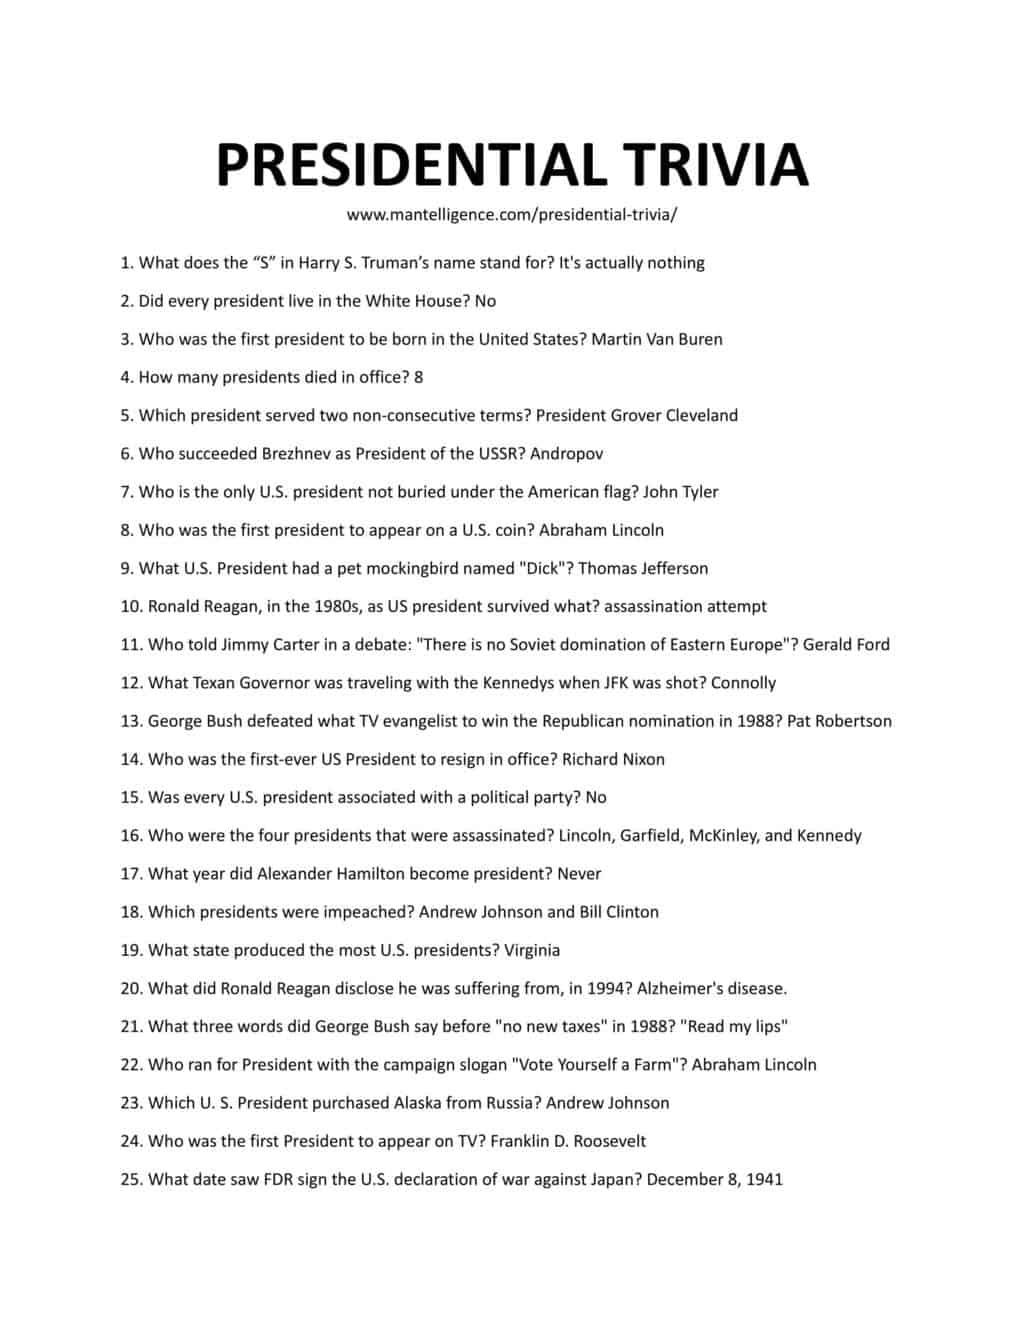 52 Presidential Trivia It's Great To Learn More About Heads of State